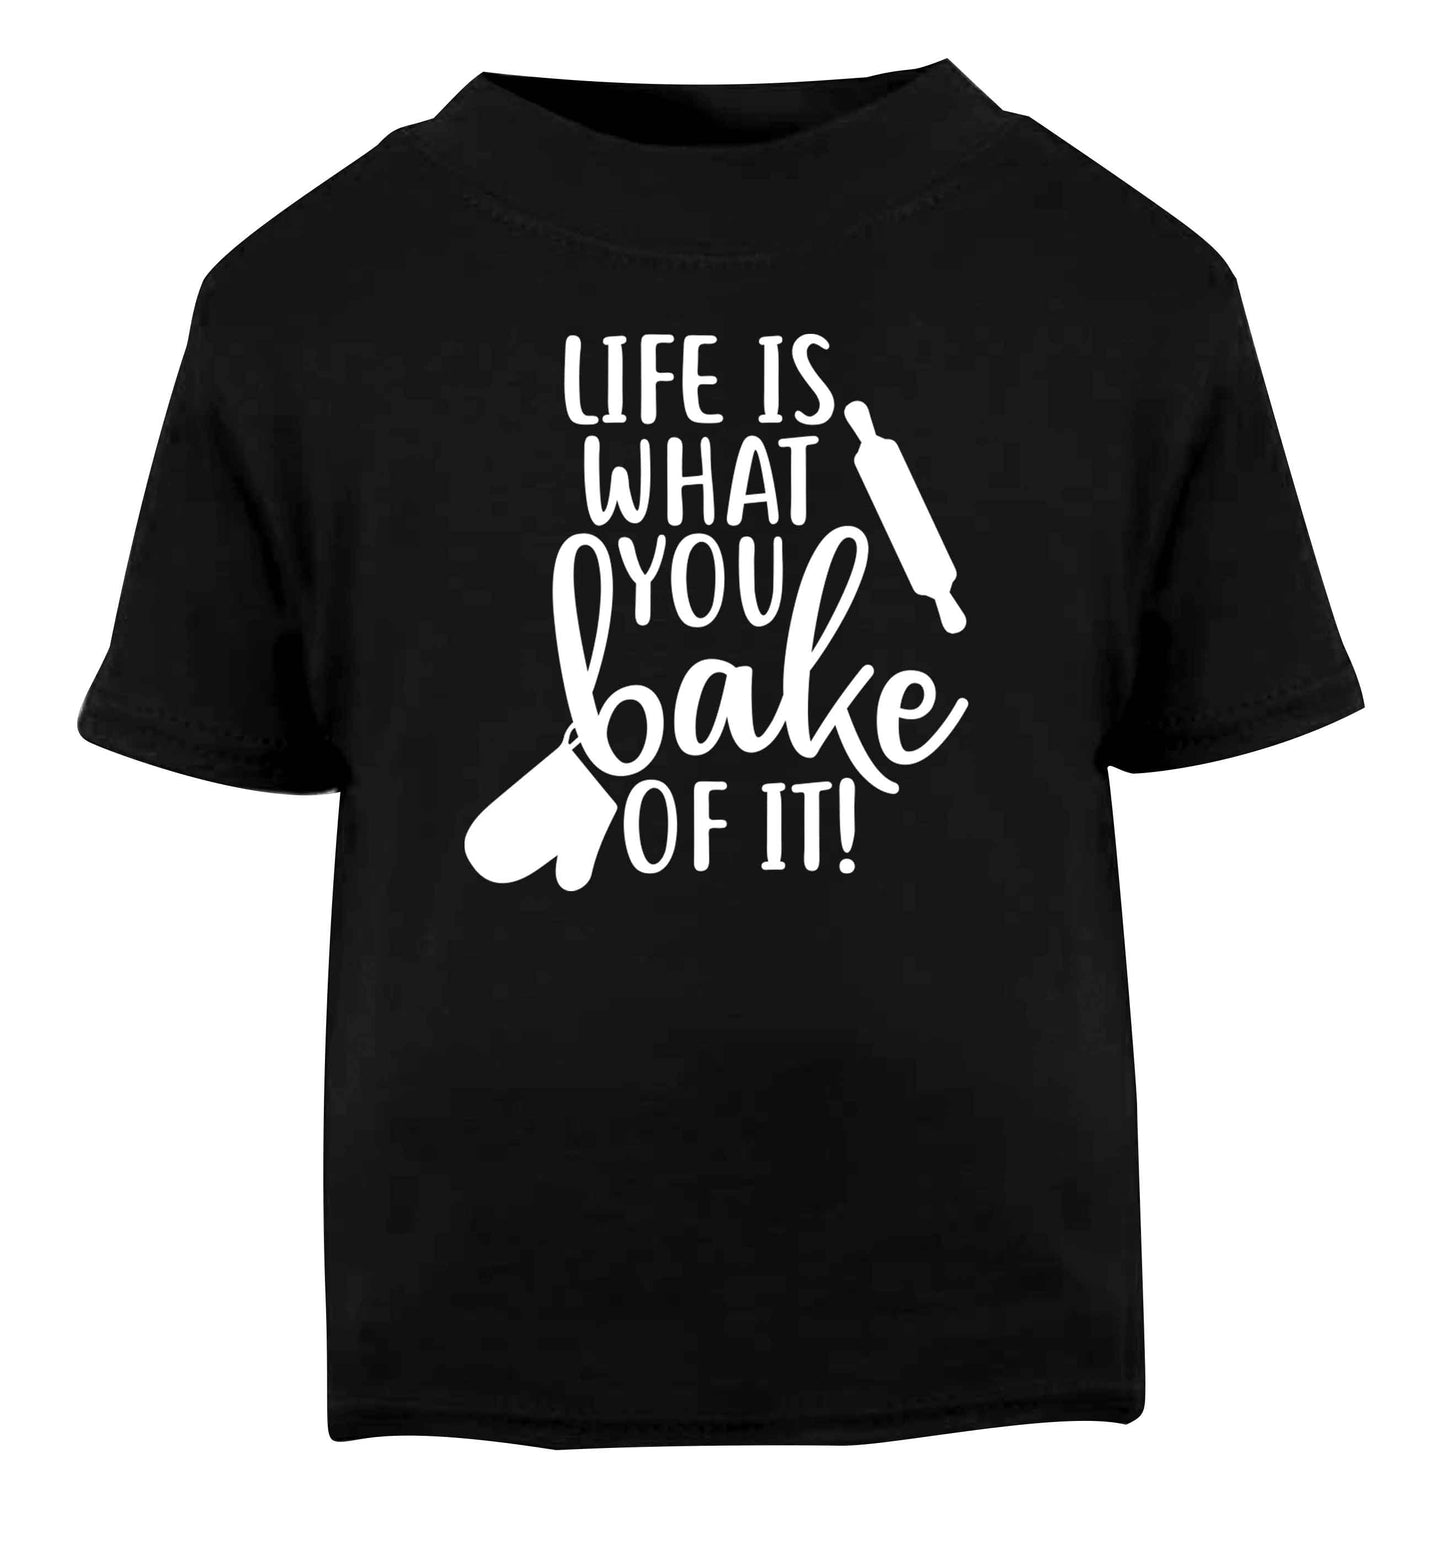 Life is what you bake of it Black Baby Toddler Tshirt 2 years